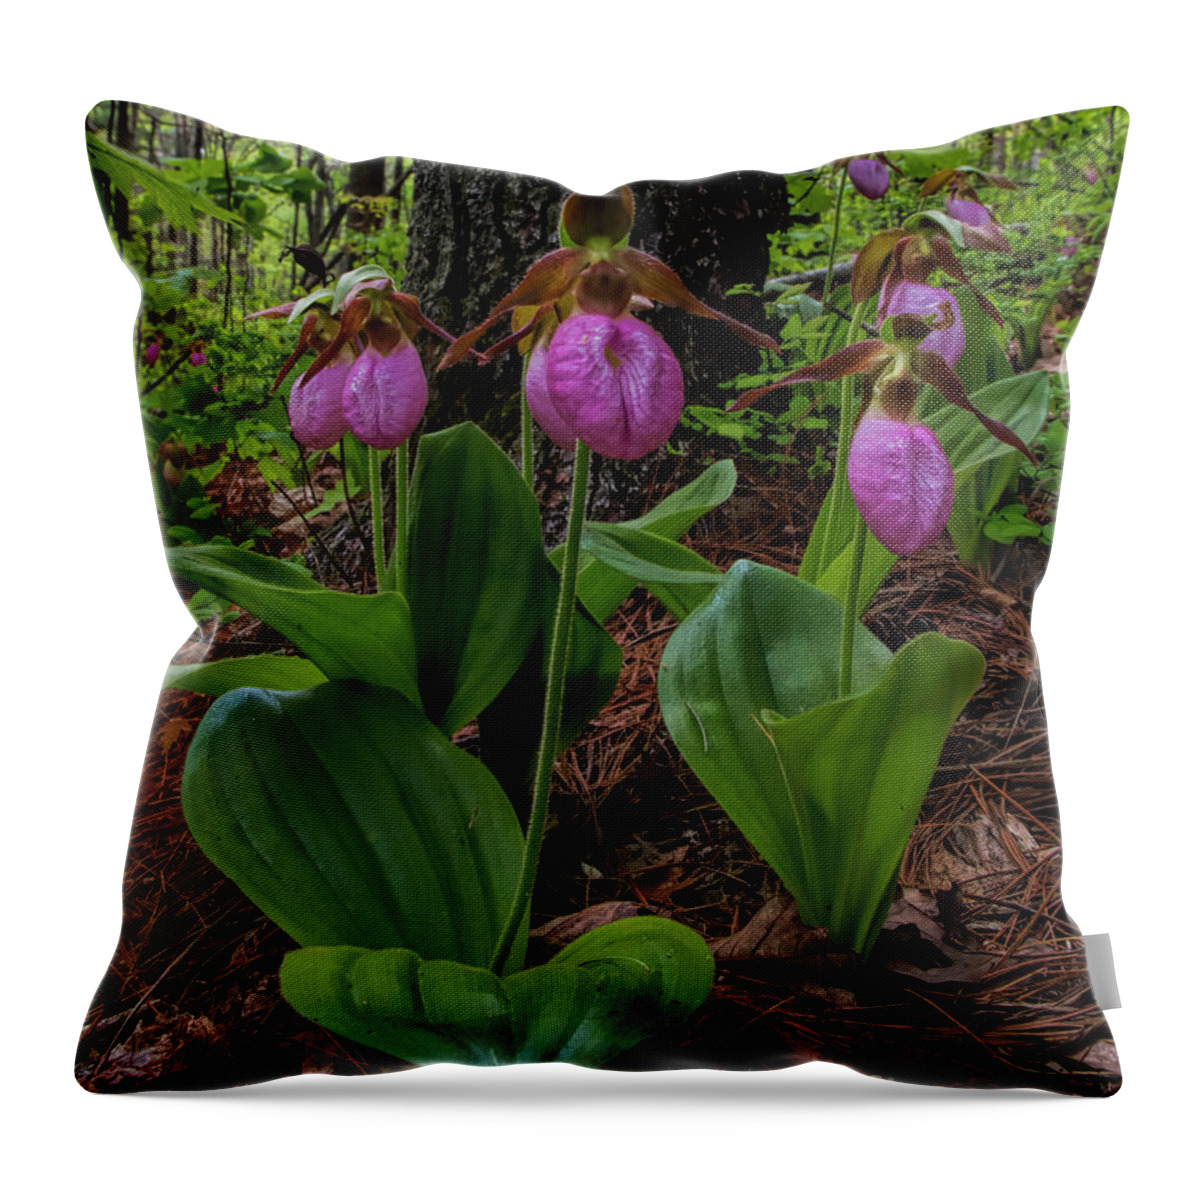 Pink Ladies Slipper Throw Pillow featuring the photograph Pink Ladies Slipper Patch #2 by Barbara Bowen